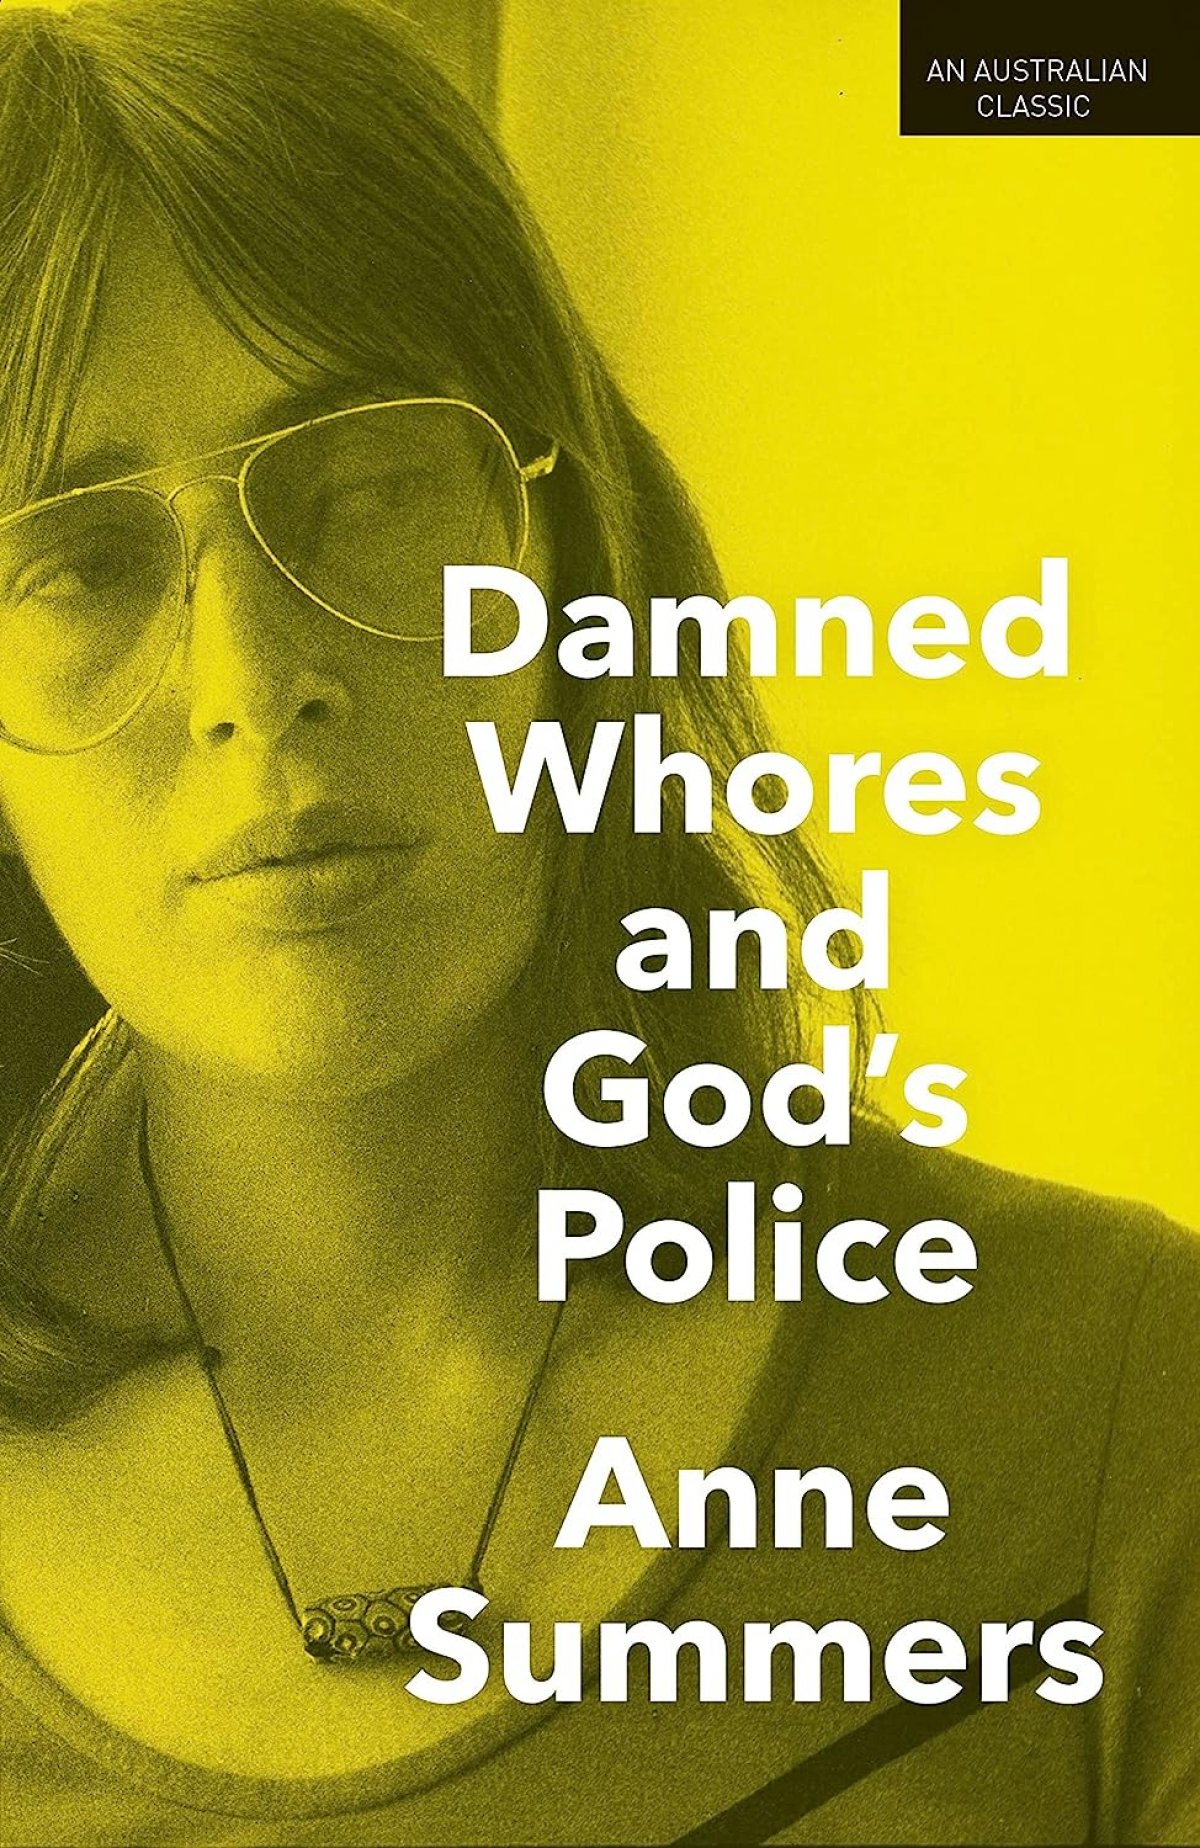 The front cover of a book. It is yellow and grey. A woman wearing large glasses looks off camera. The title of the book reads "DAMNED WHORES AND GOD'S POLICE - ANNE SUMMERS"